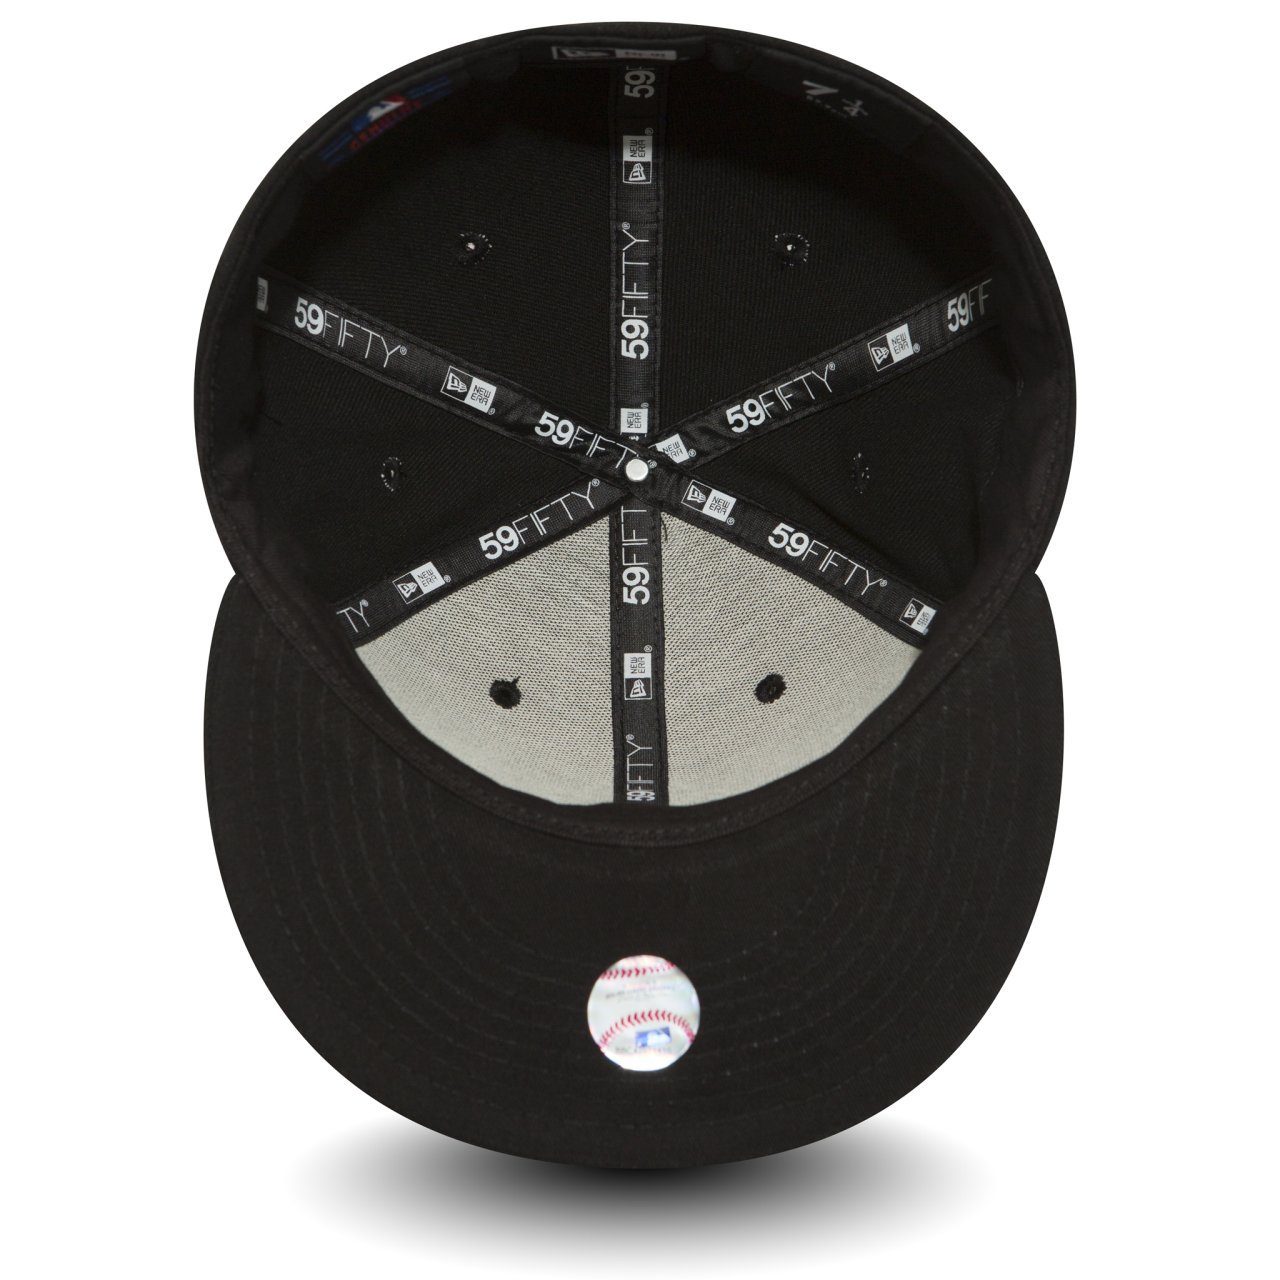 New Era Nationals 59Fifty Washington Fitted Cap MLB